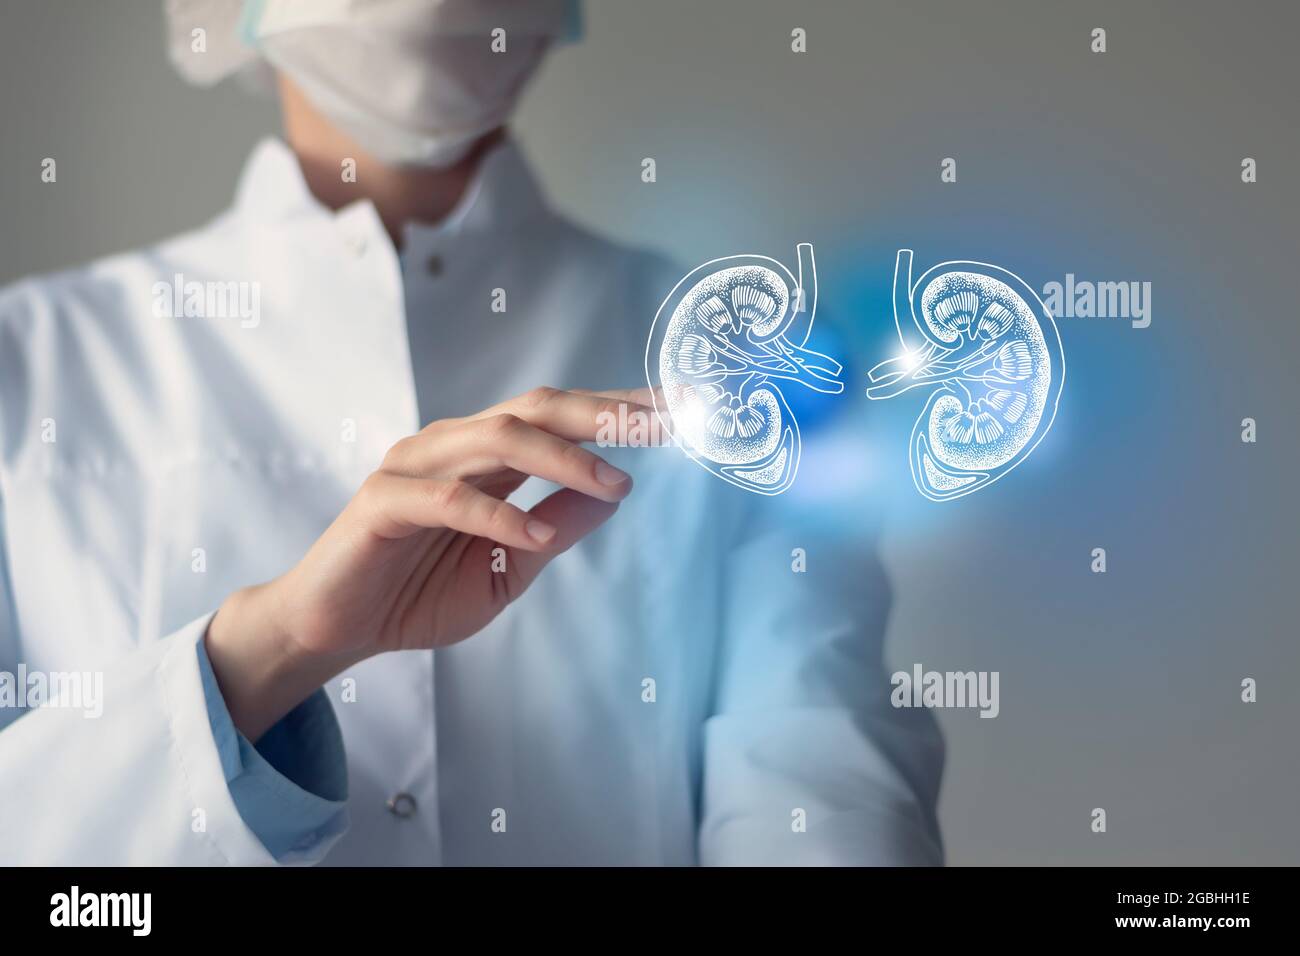 Female doctor touches virtual Kidneys in hand. Blurred photo, handrawn human organ, highlighted blue as symbol of recovery. Healthcare hospital servic Stock Photo